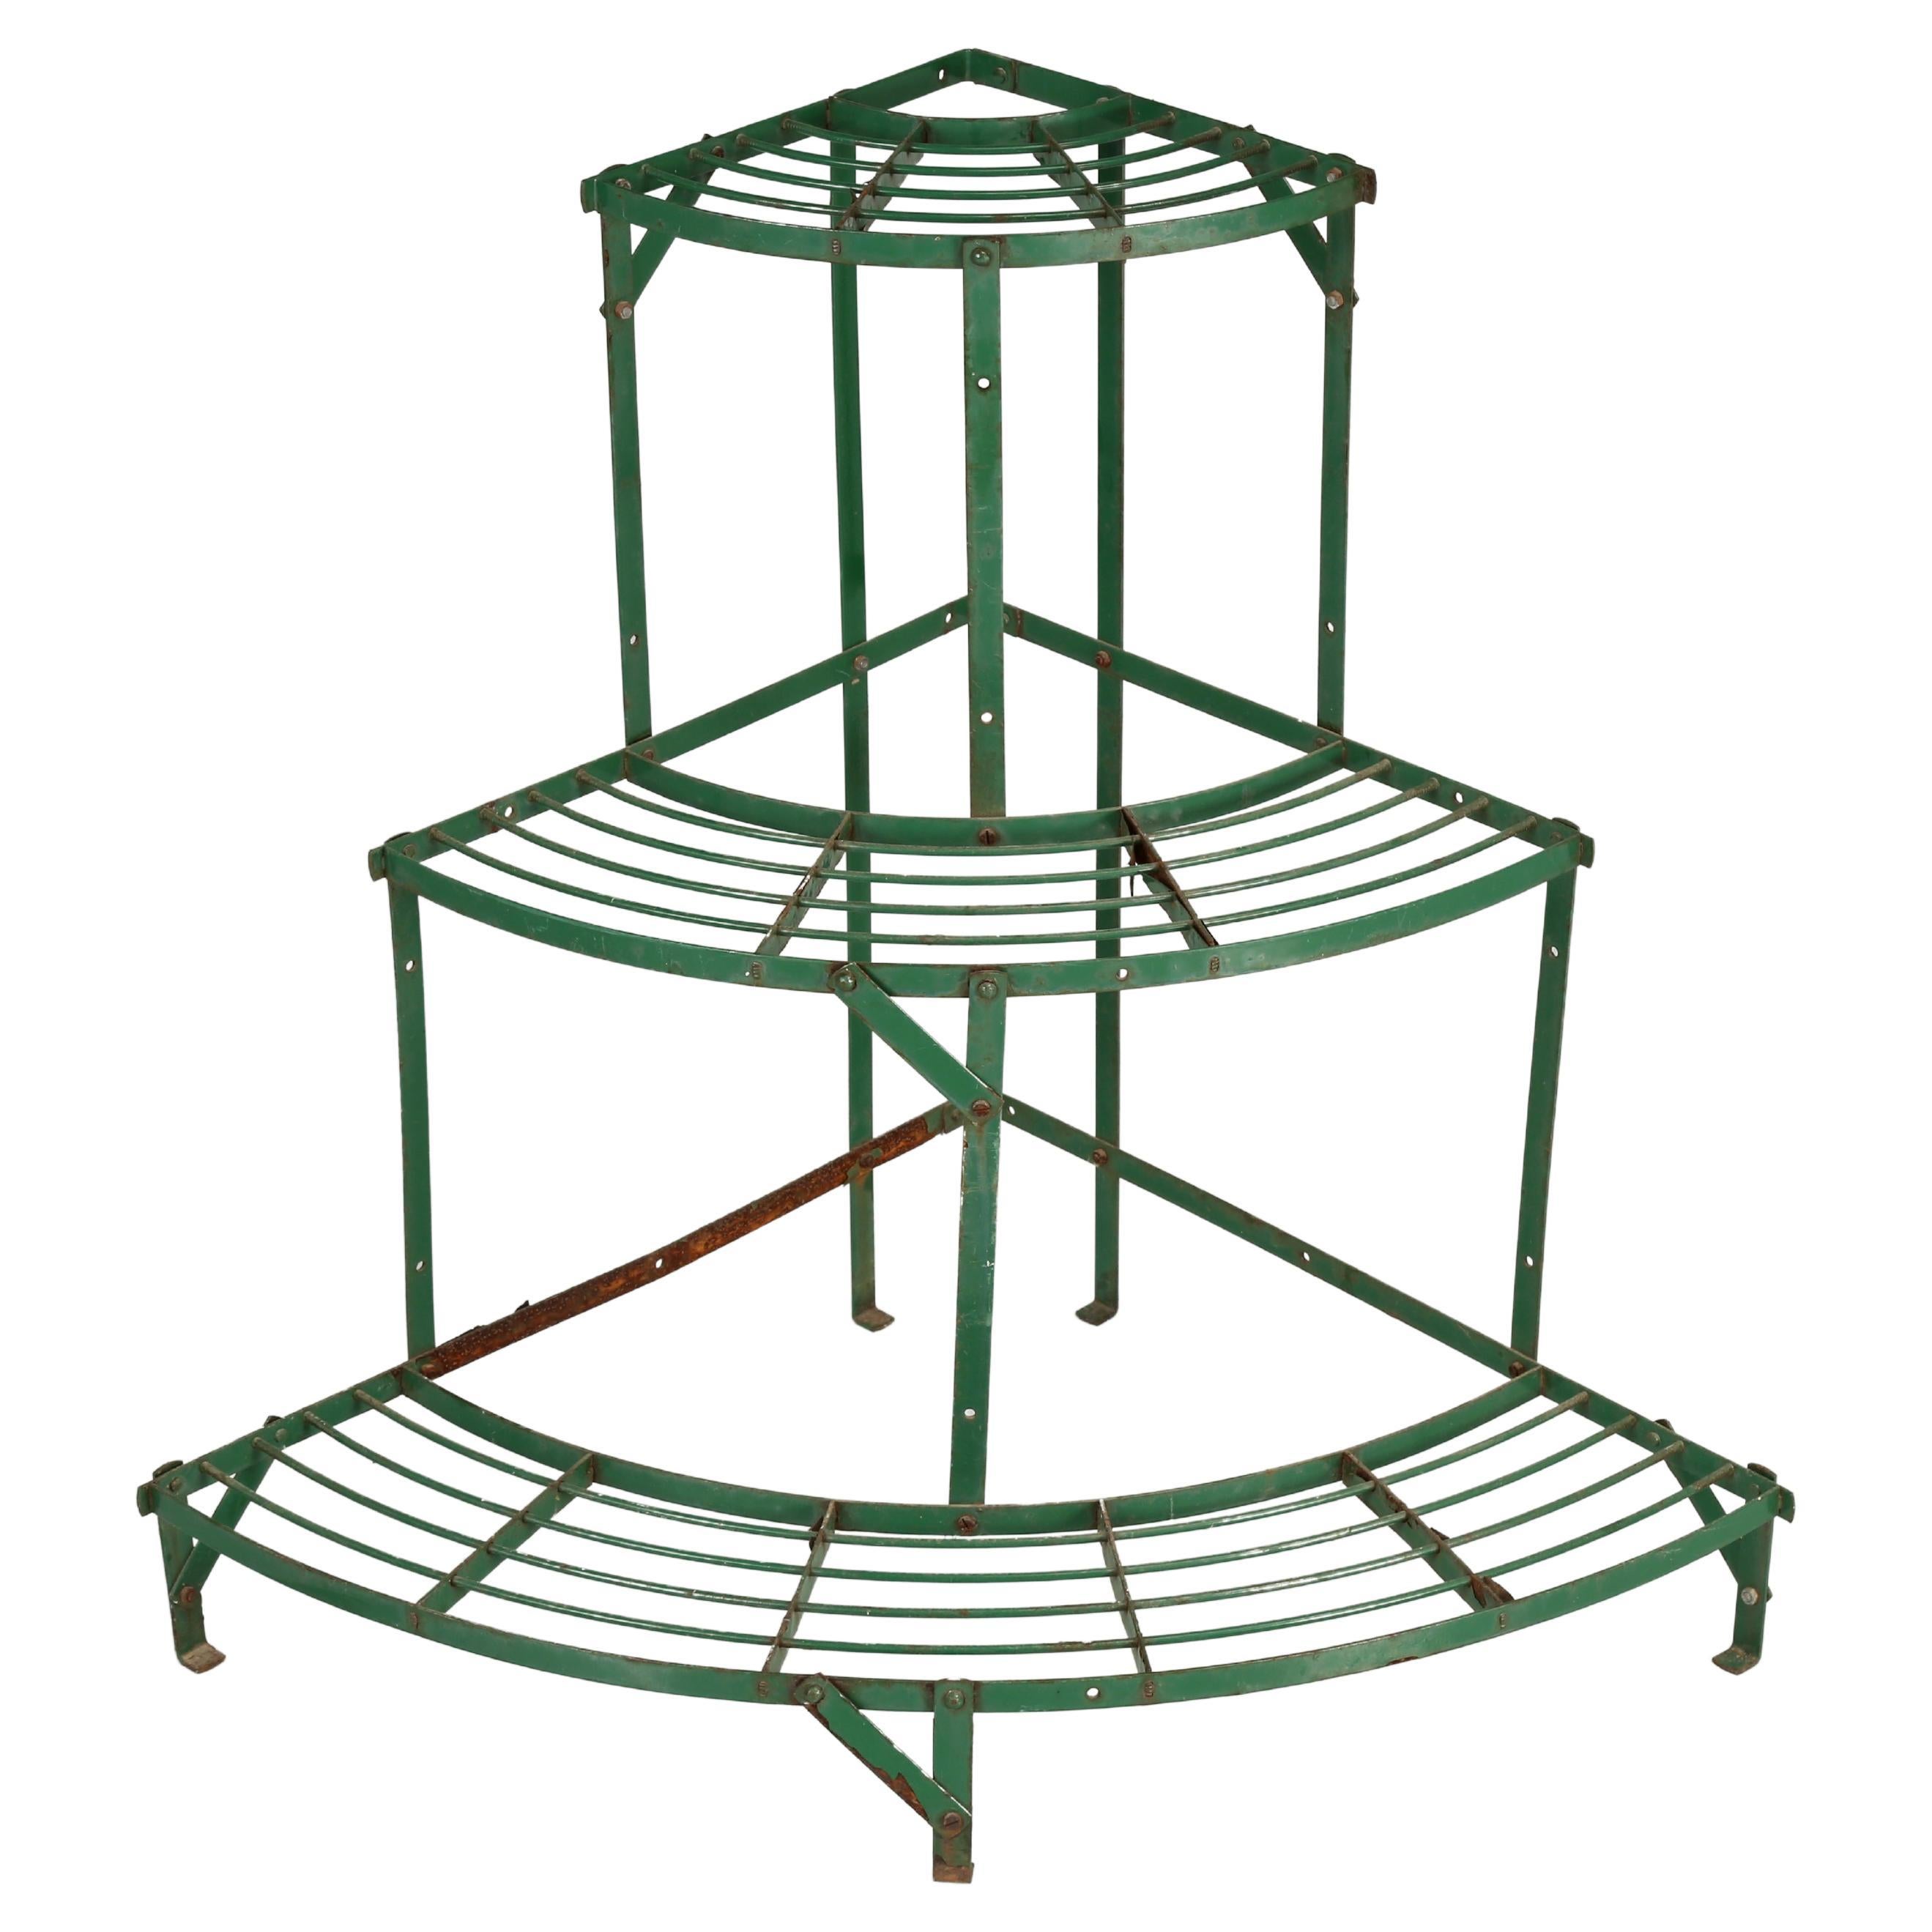 English 3-Tier Demilune Plant Stand in Old Green Paint from Staffordshire, UK